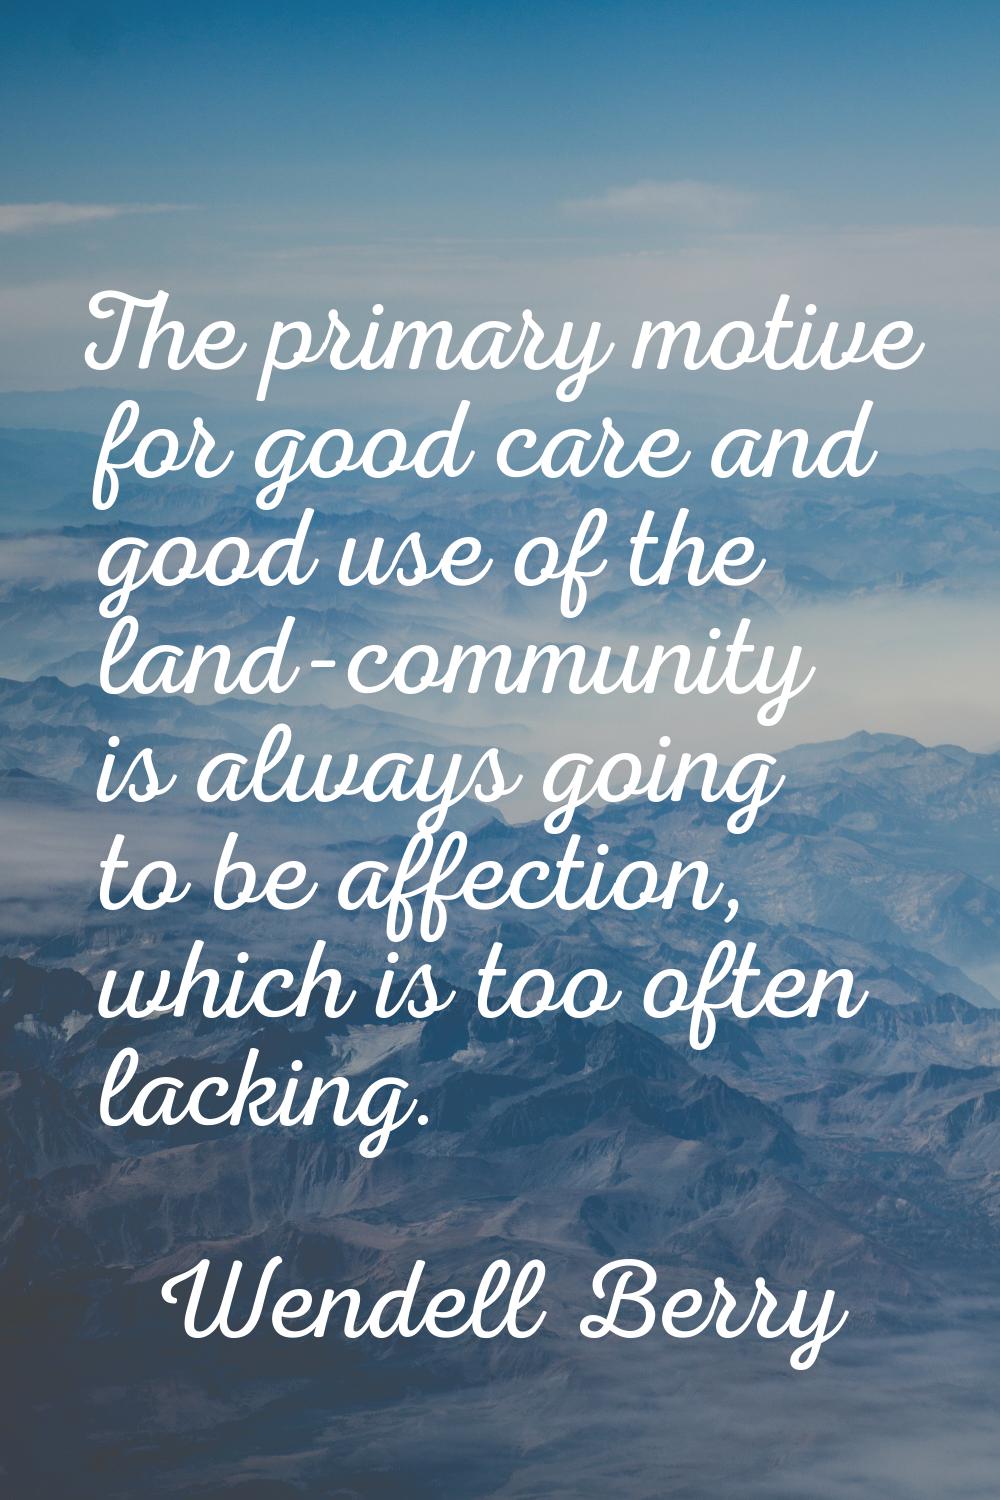 The primary motive for good care and good use of the land-community is always going to be affection